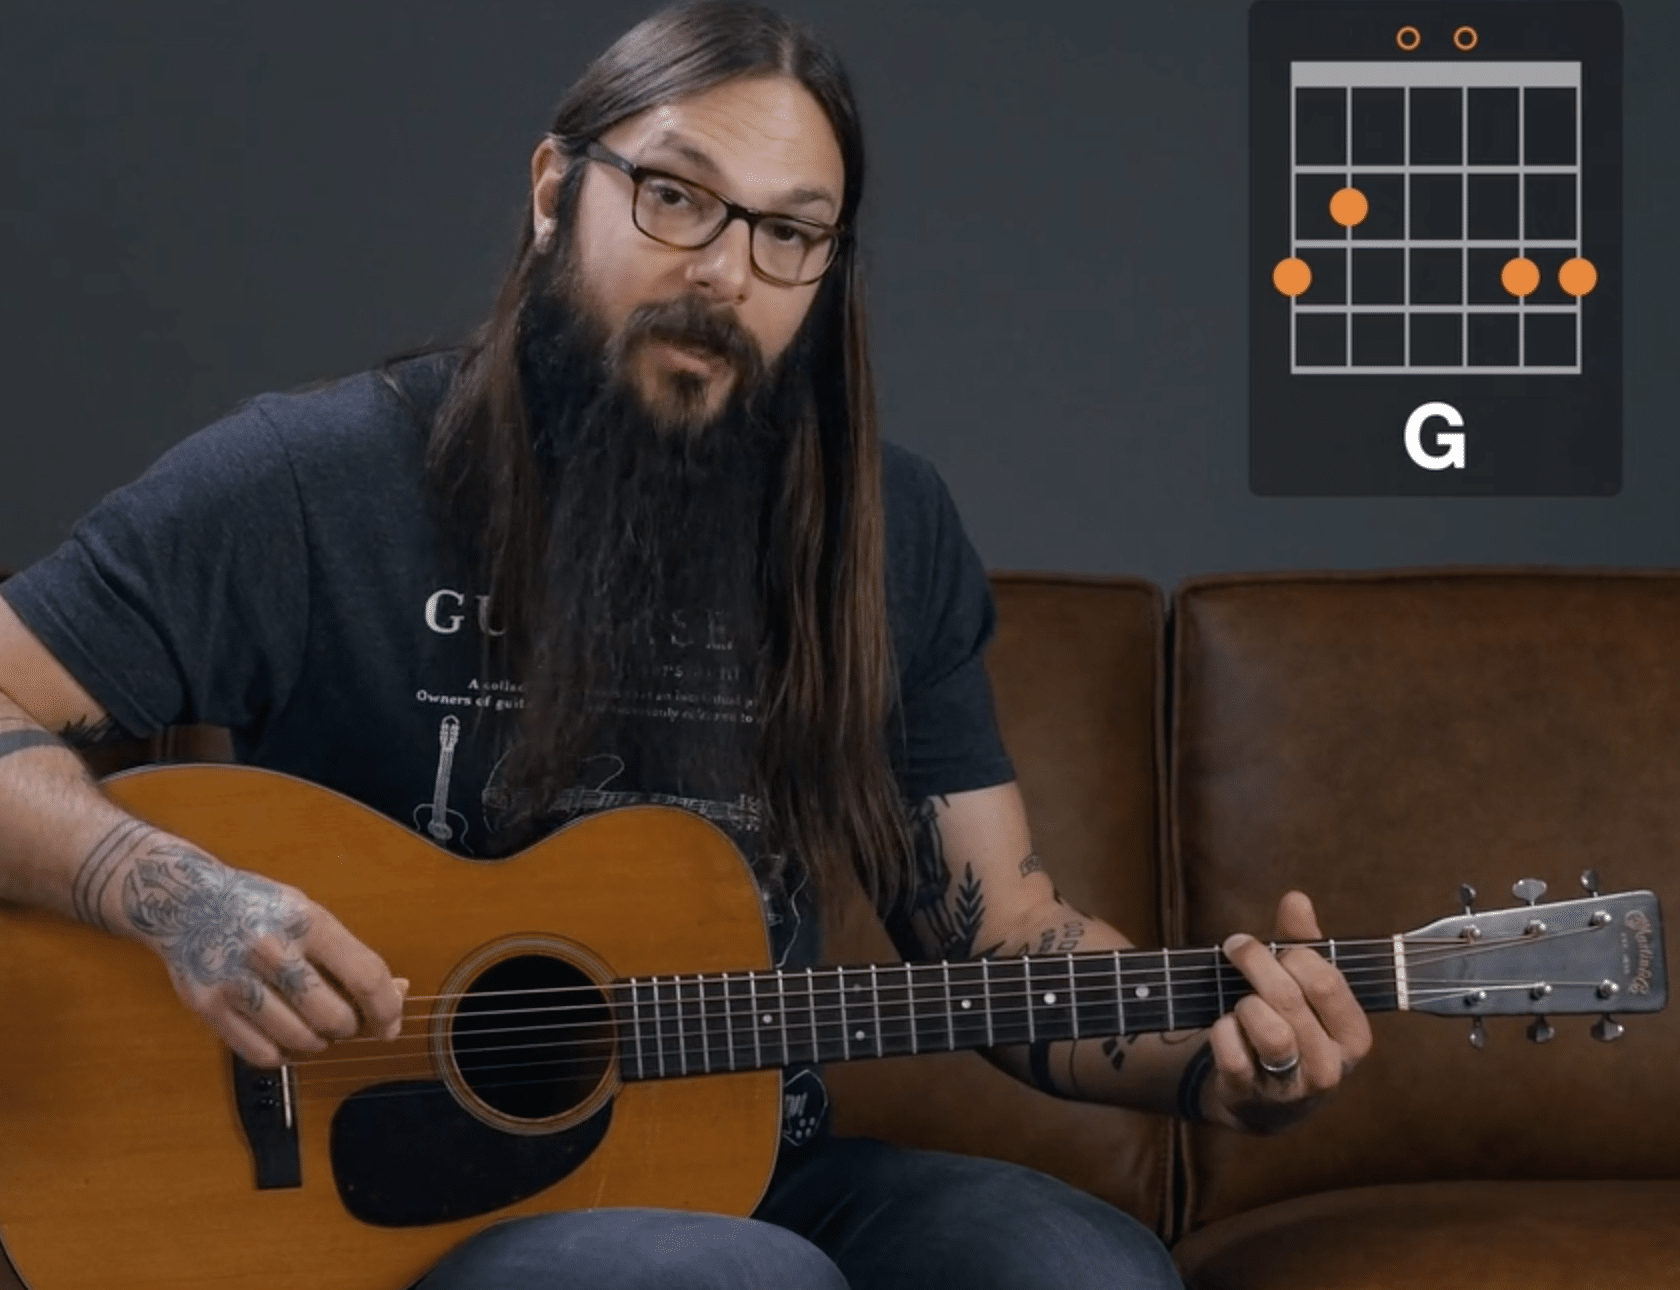 How To Play Guitar Chords Learn The G Chord Essential Guitar Chords Learn To Play Guitar